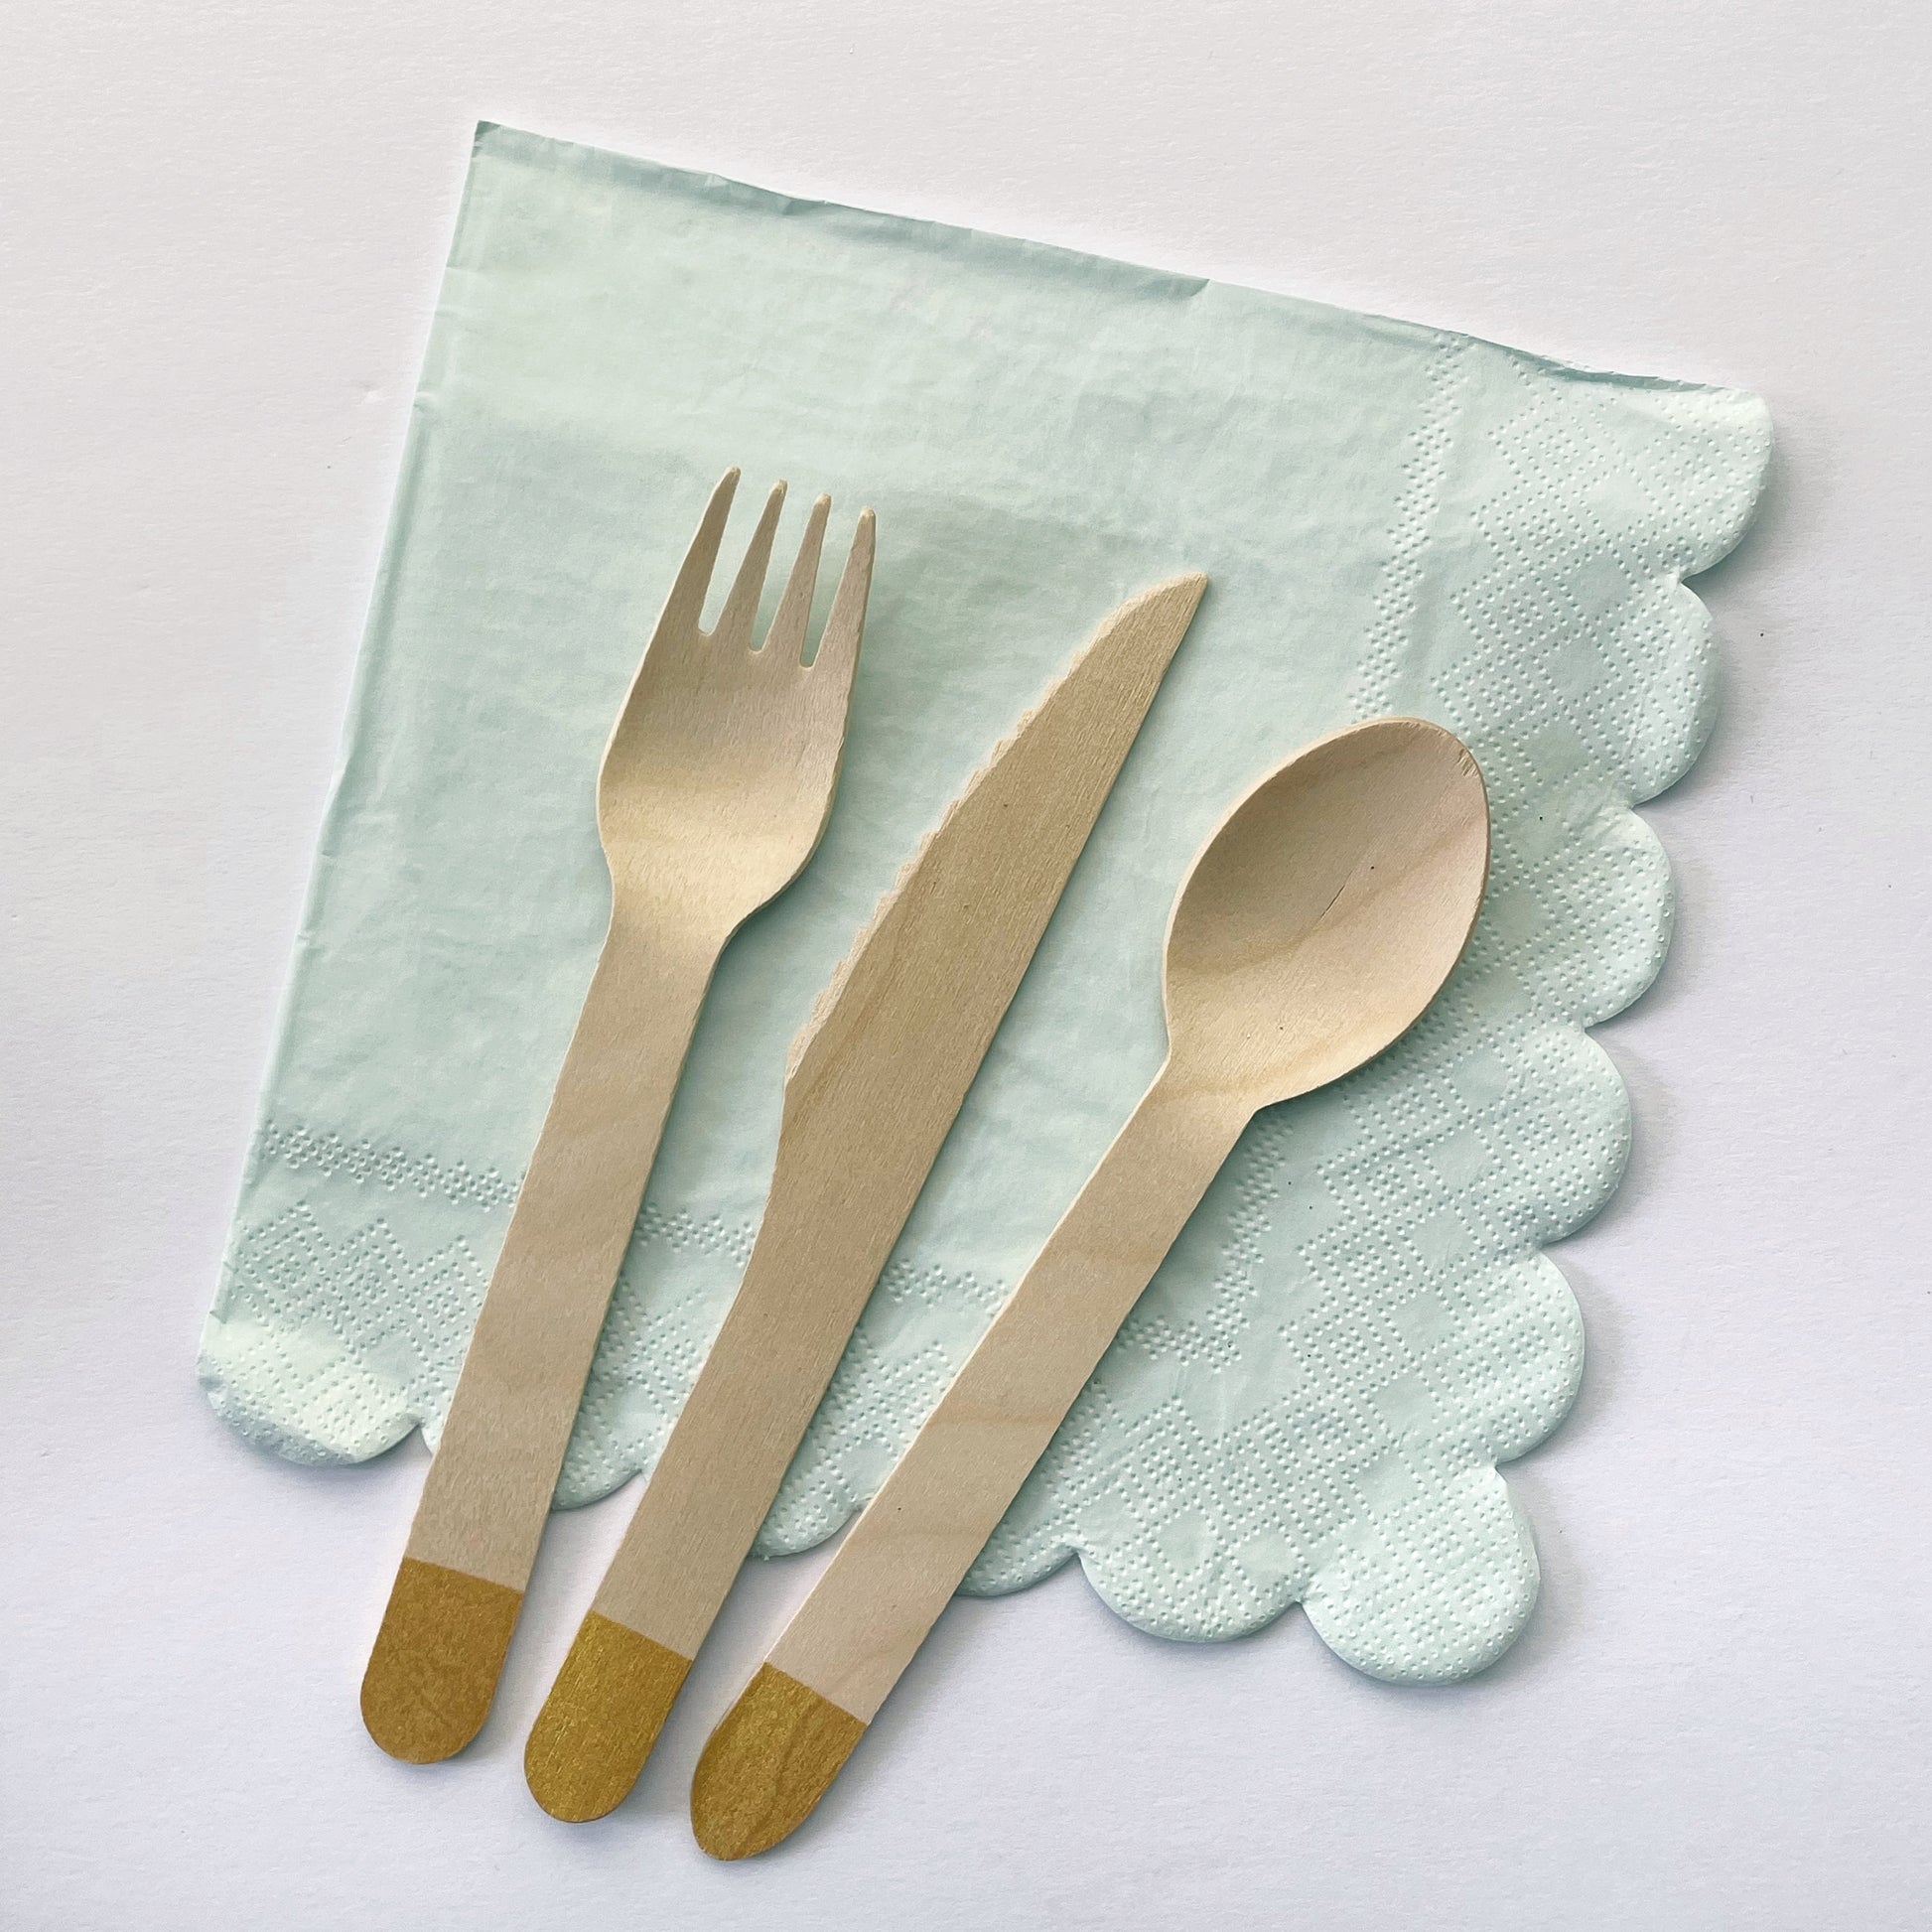 Pale pastel blue paper party napkins with a scalloped trim. Gold dipped wooden utenils.